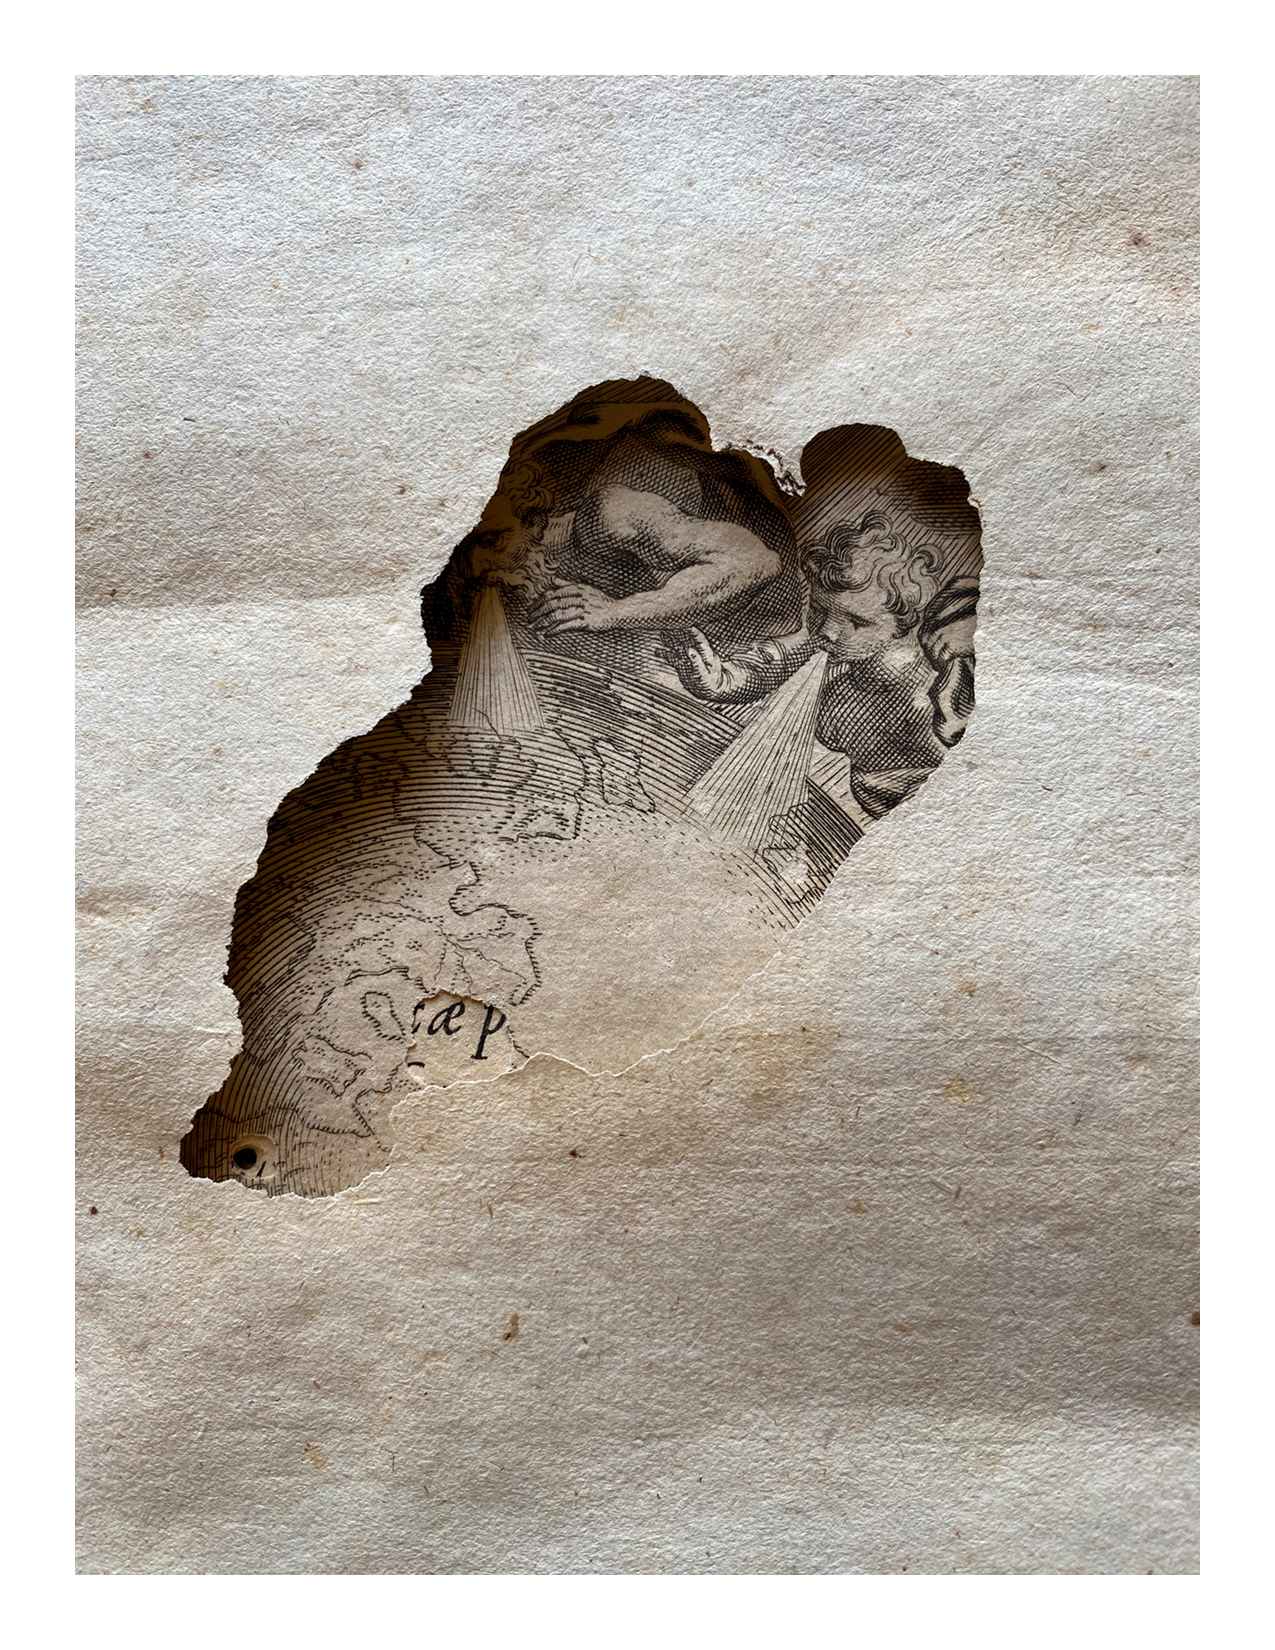 An image of a close up page in an old book. The page has a large irregularly shaped hole thought which one can peek at an engraving below. The hole is a frame, revealing an image of an old man and a child blowing their breath upon the Earth.